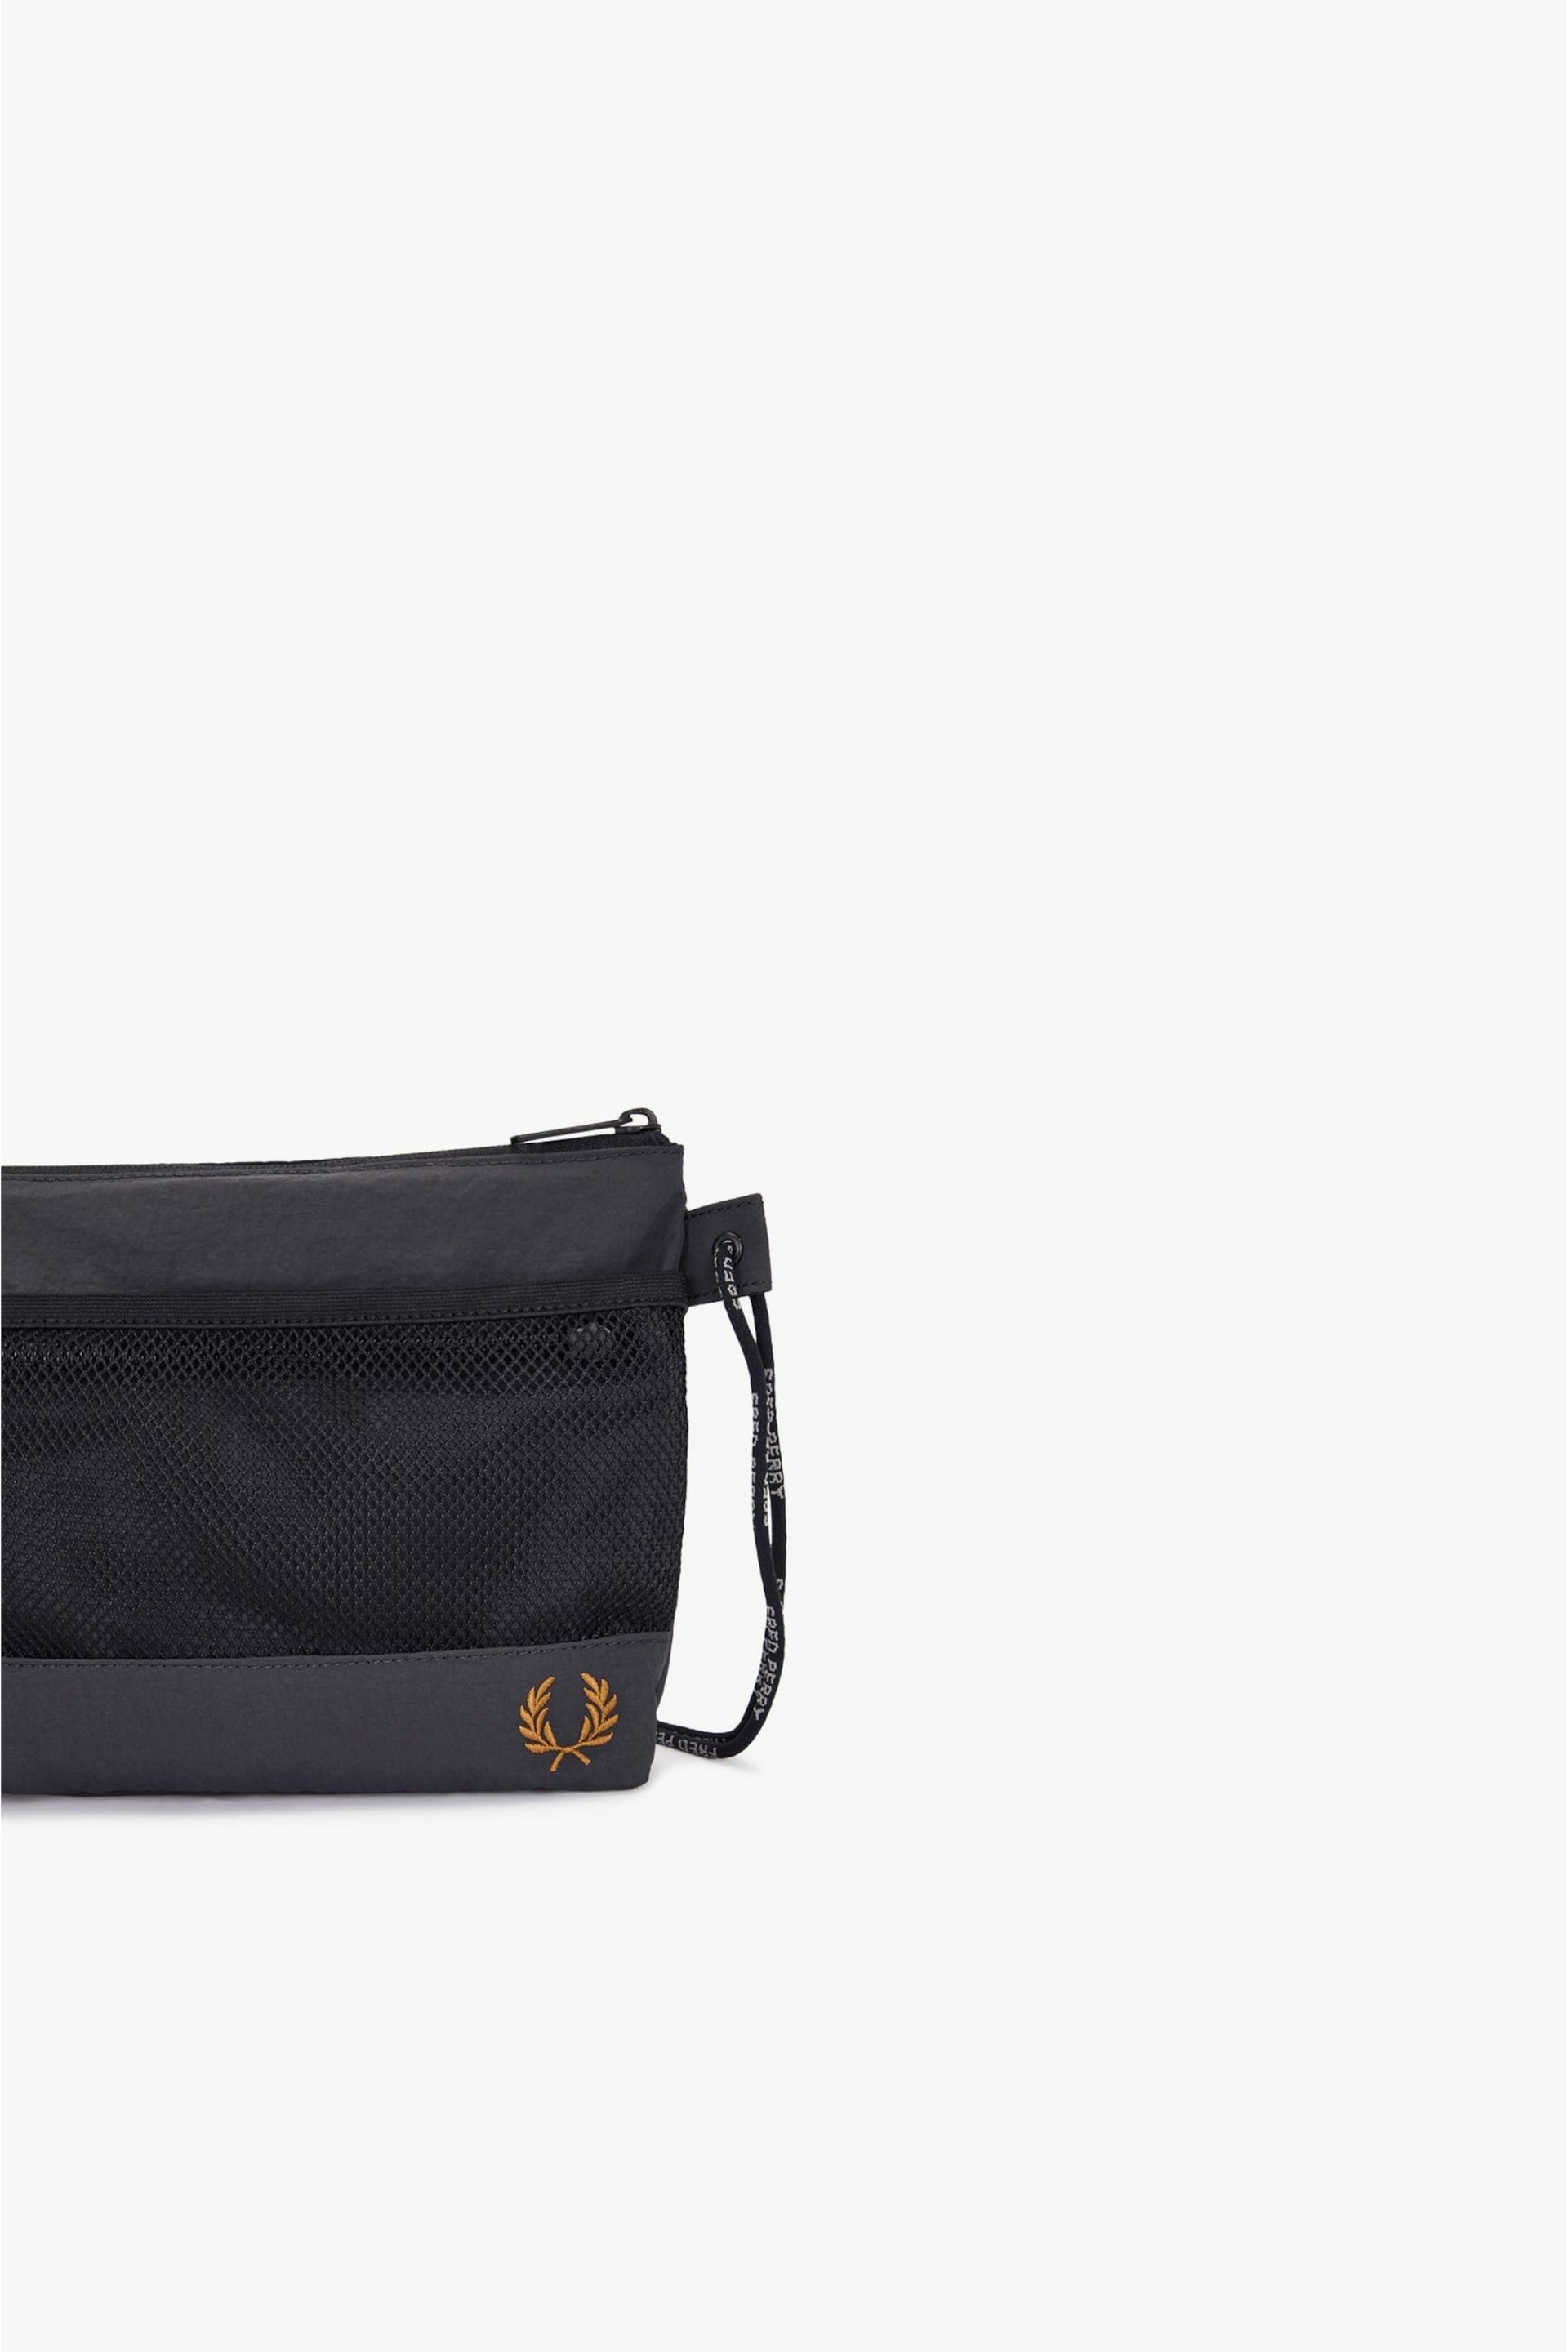 Fred Perry Grey Nylon Cross-Body Bag - Image 3 of 3